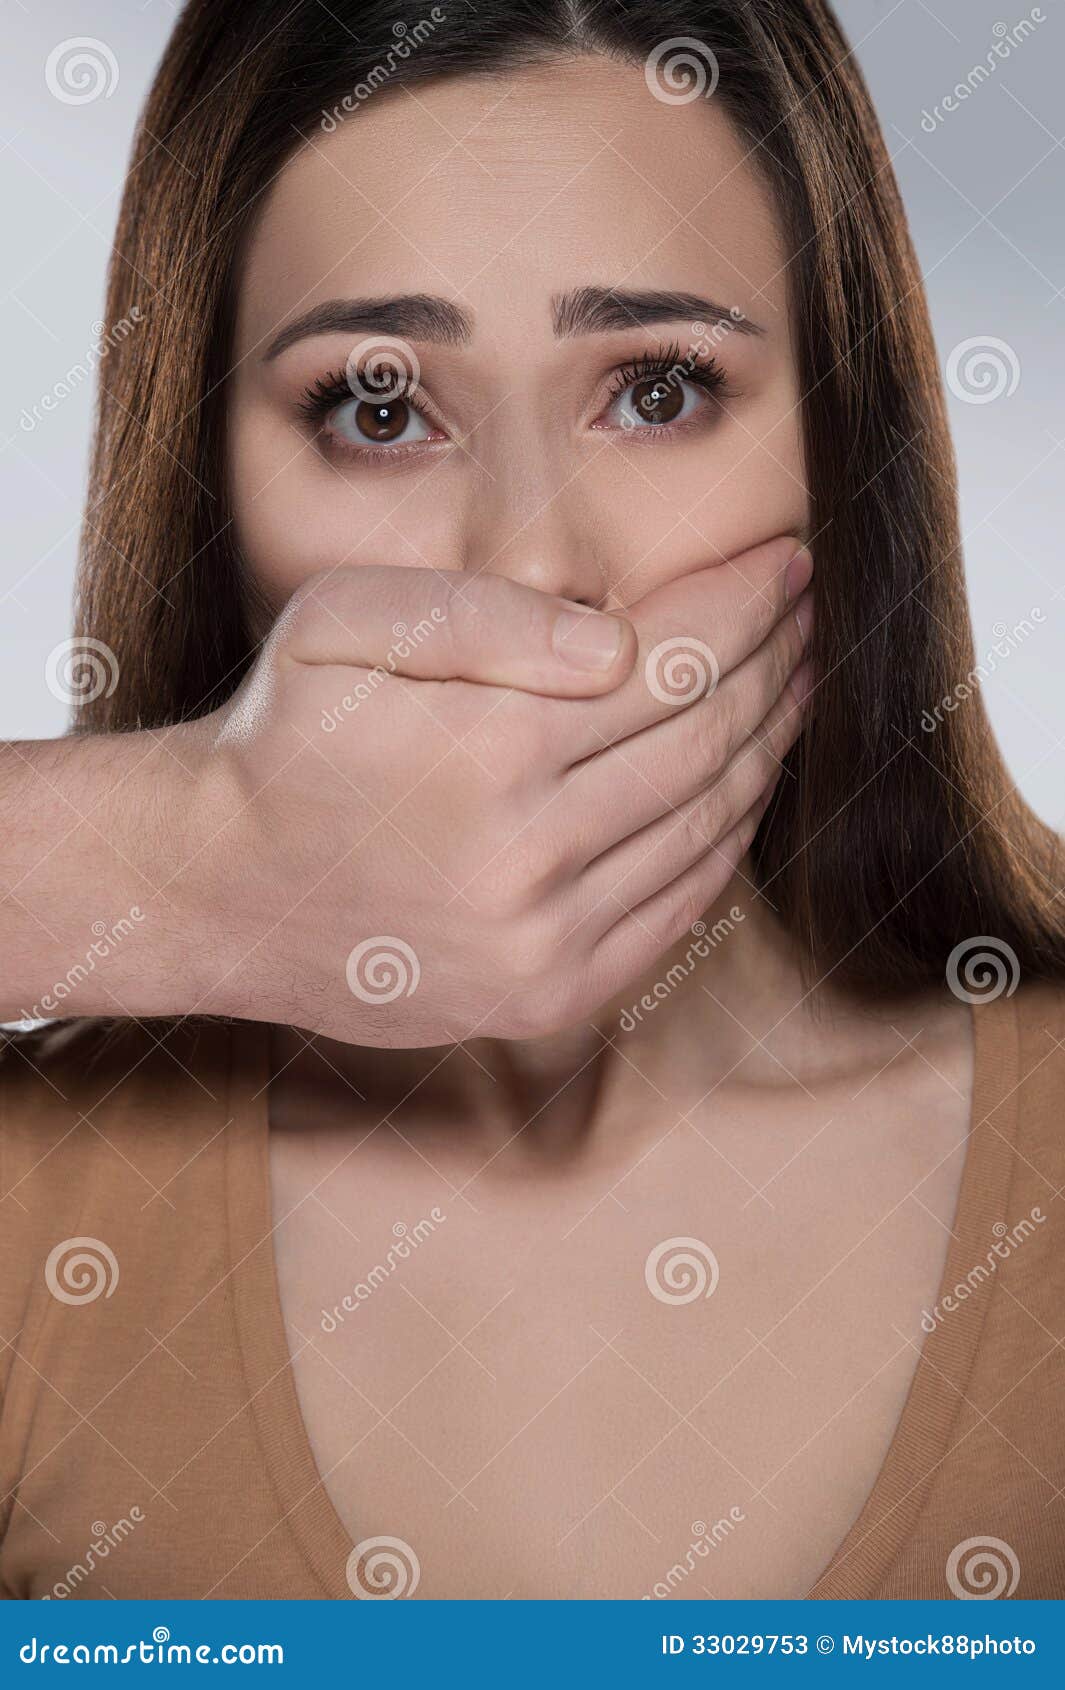 shut-up-shocked-young-woman-looking-camera-someone-covering-her-mouth-hand-33029753.jpg